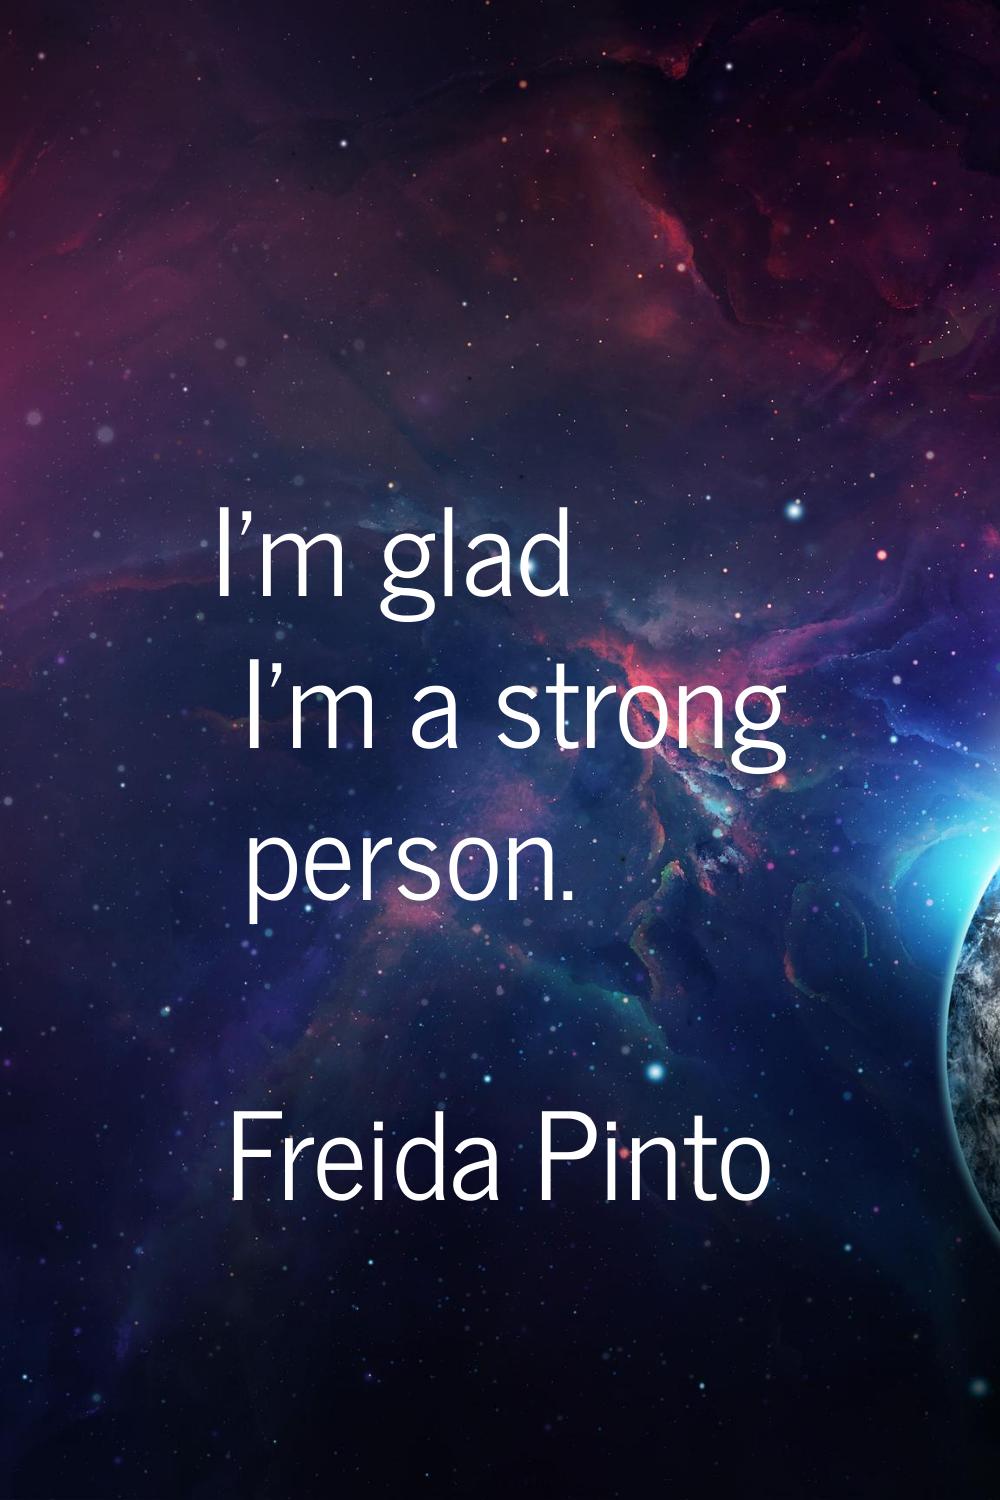 I'm glad I'm a strong person.